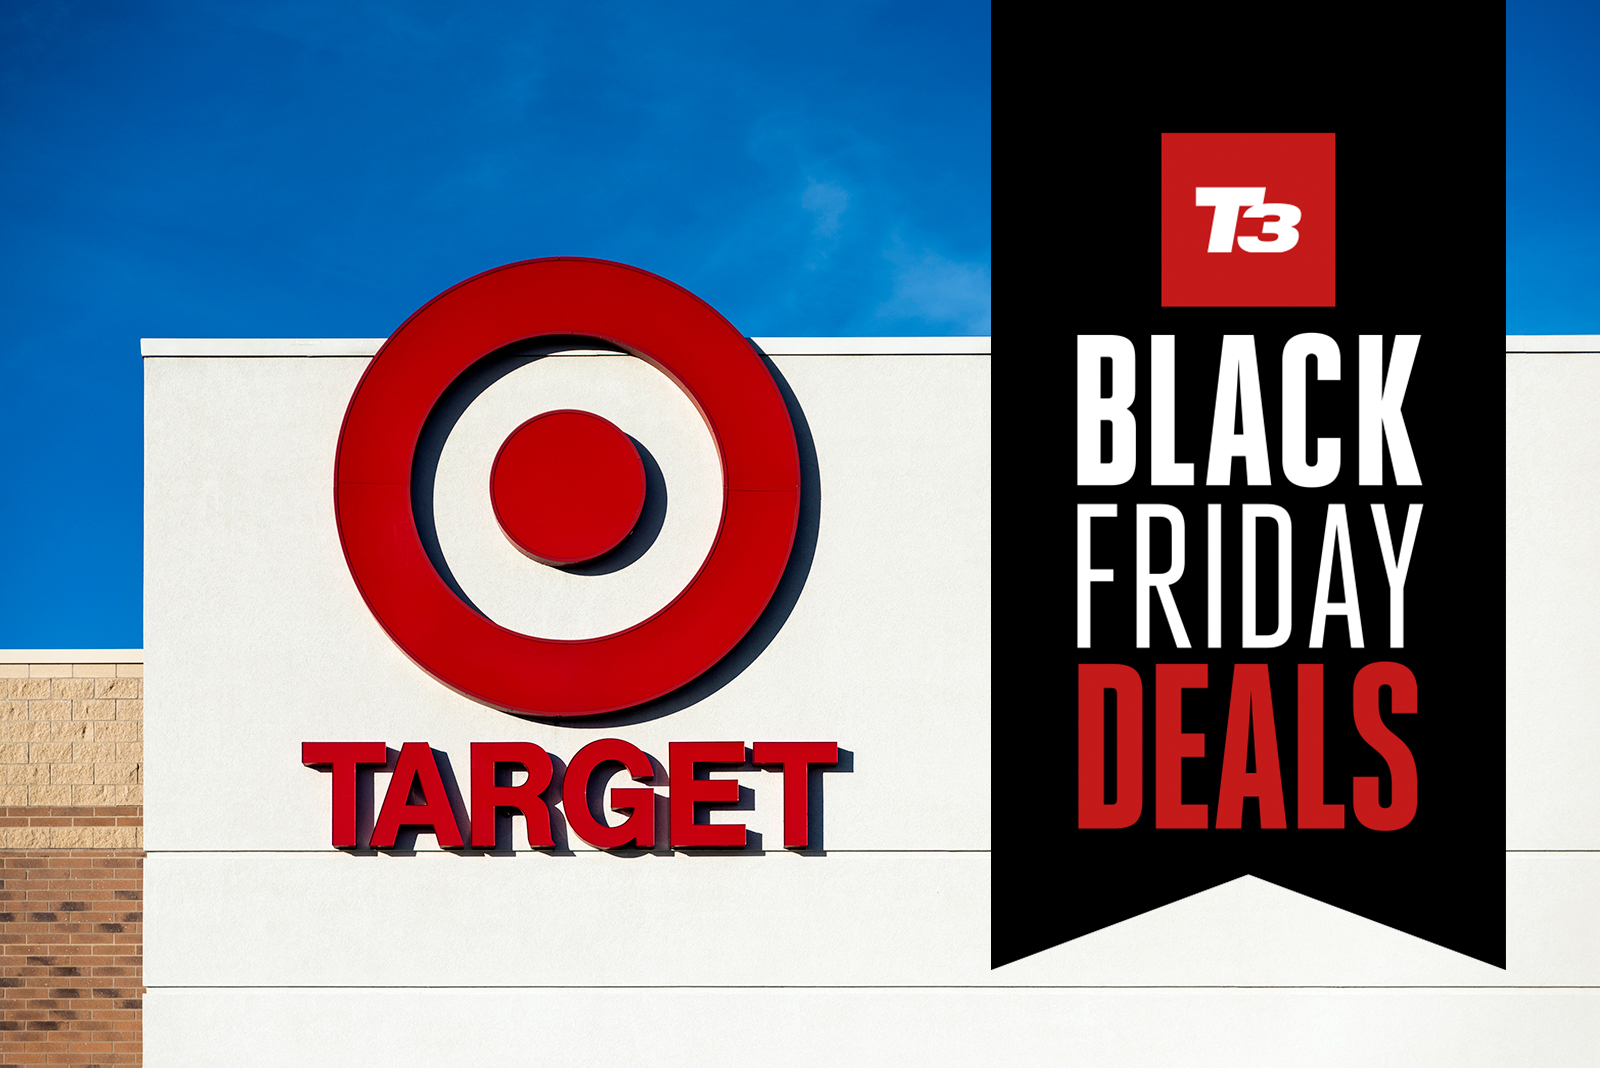 Are you ready for Black Friday deals? Target is!